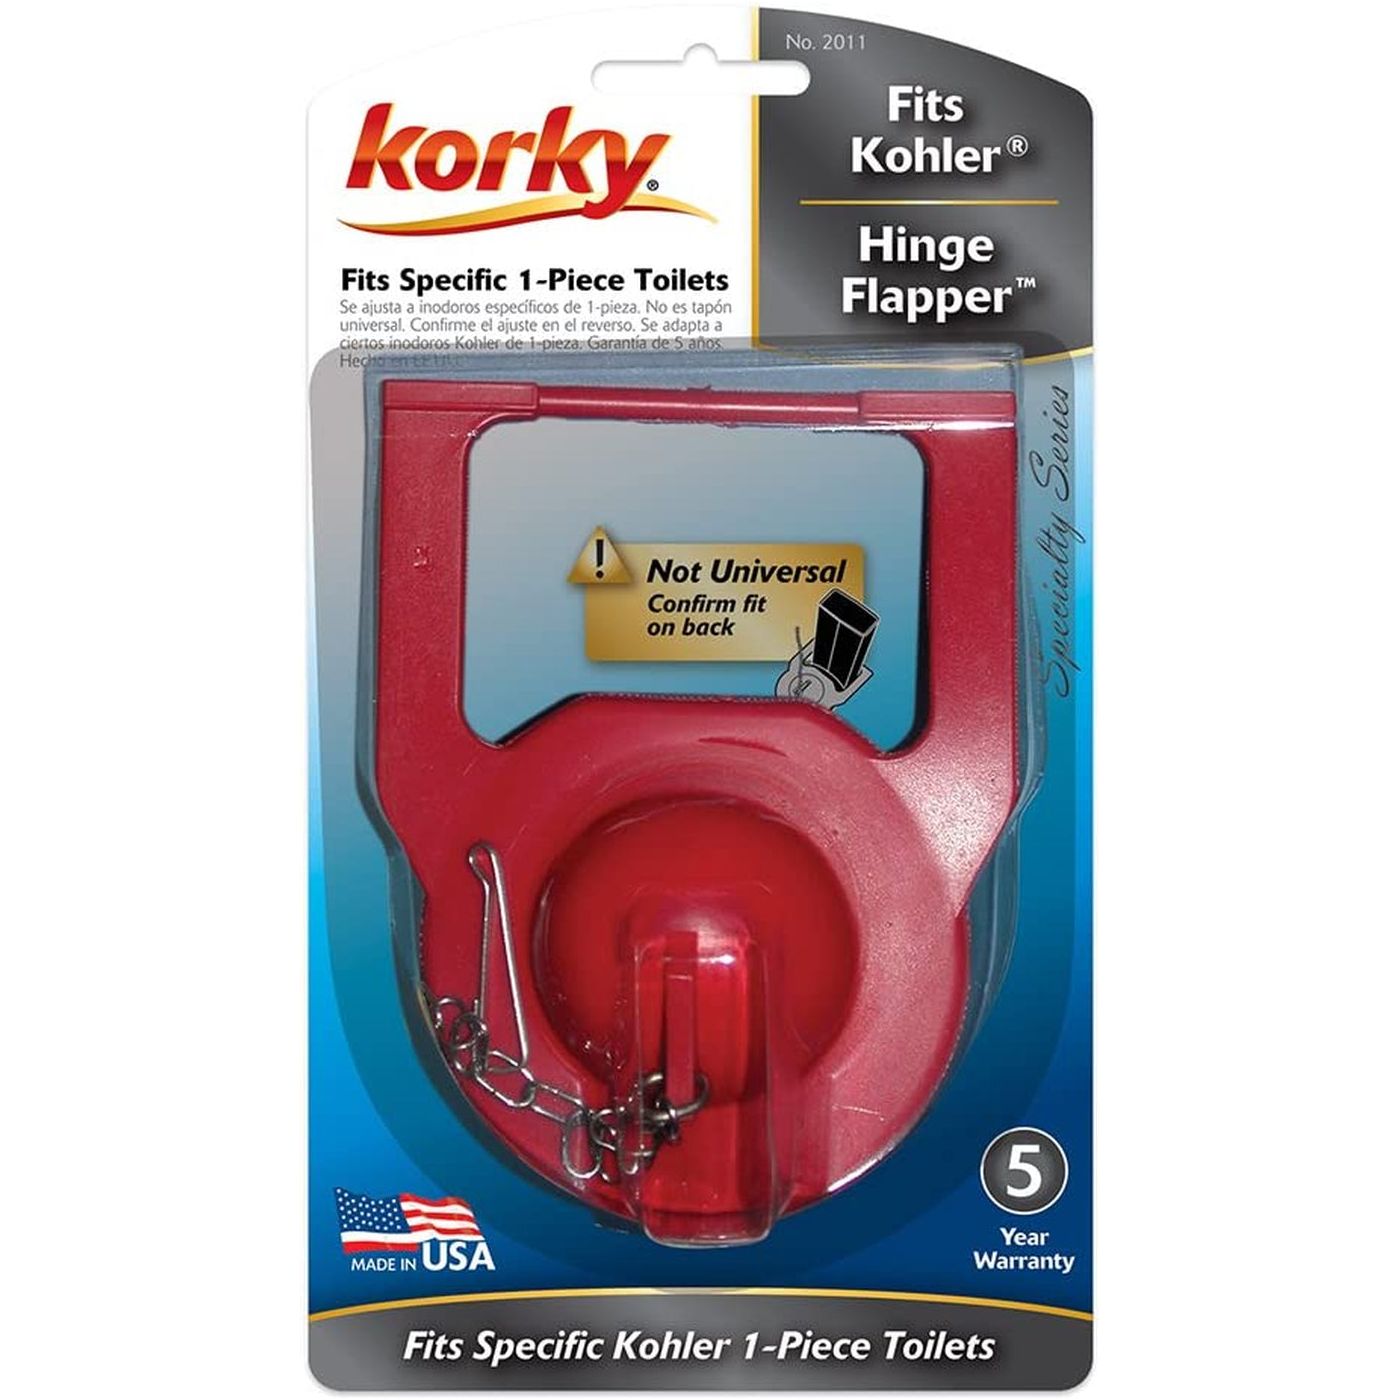 2011BP Hinge Flapper for Kohler Toilet Repairs - Replaces Kohler Parts 84995 and 1000490 - Made in USA, Red Moorescarts